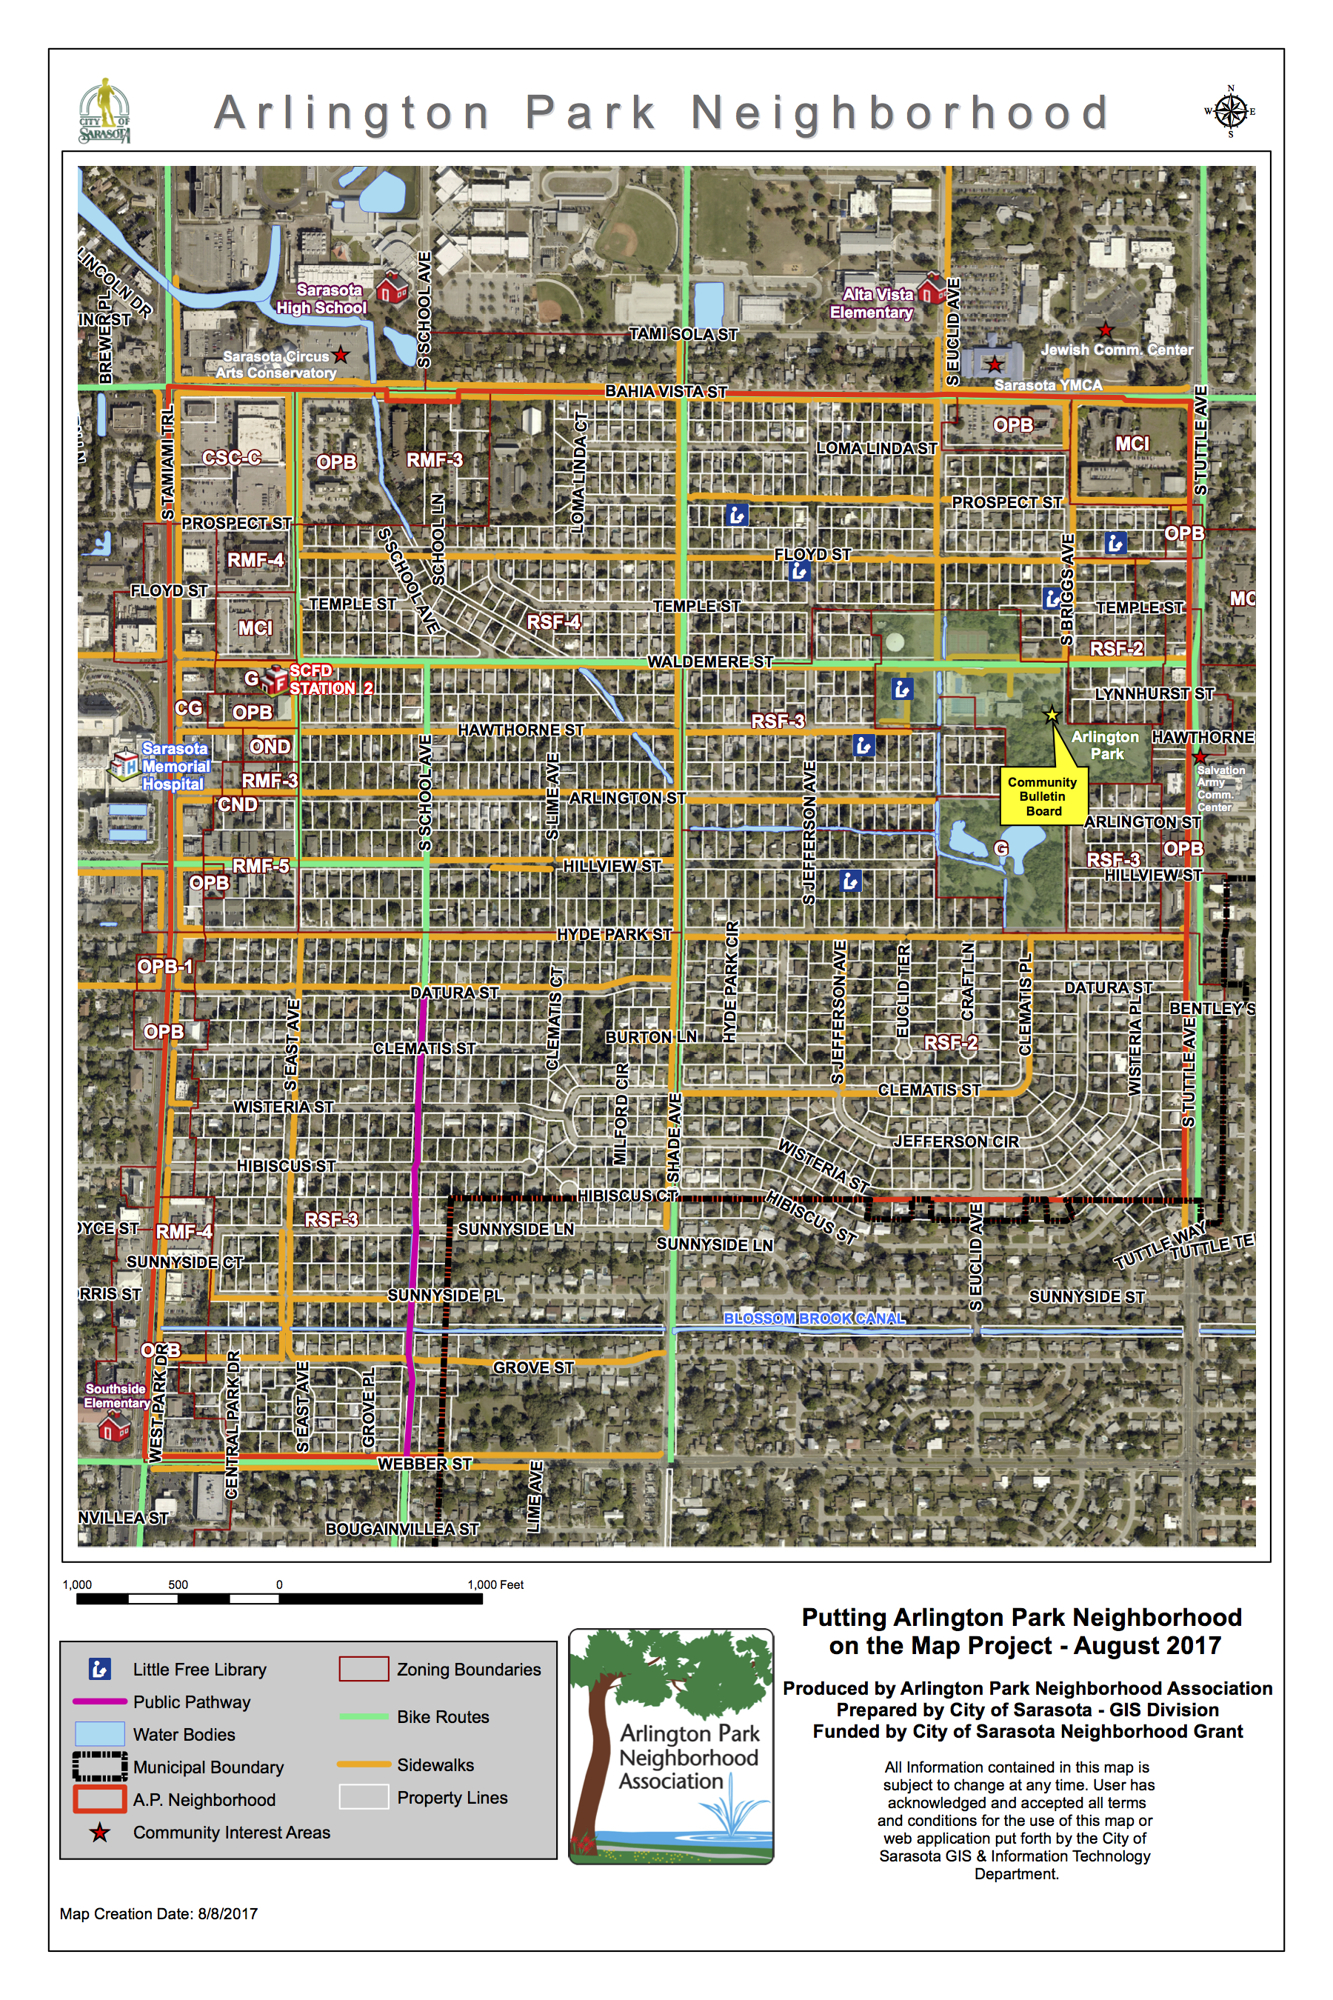 The Arlington Park neighborhood map is designed to highlight public spaces and share other important information with residents.